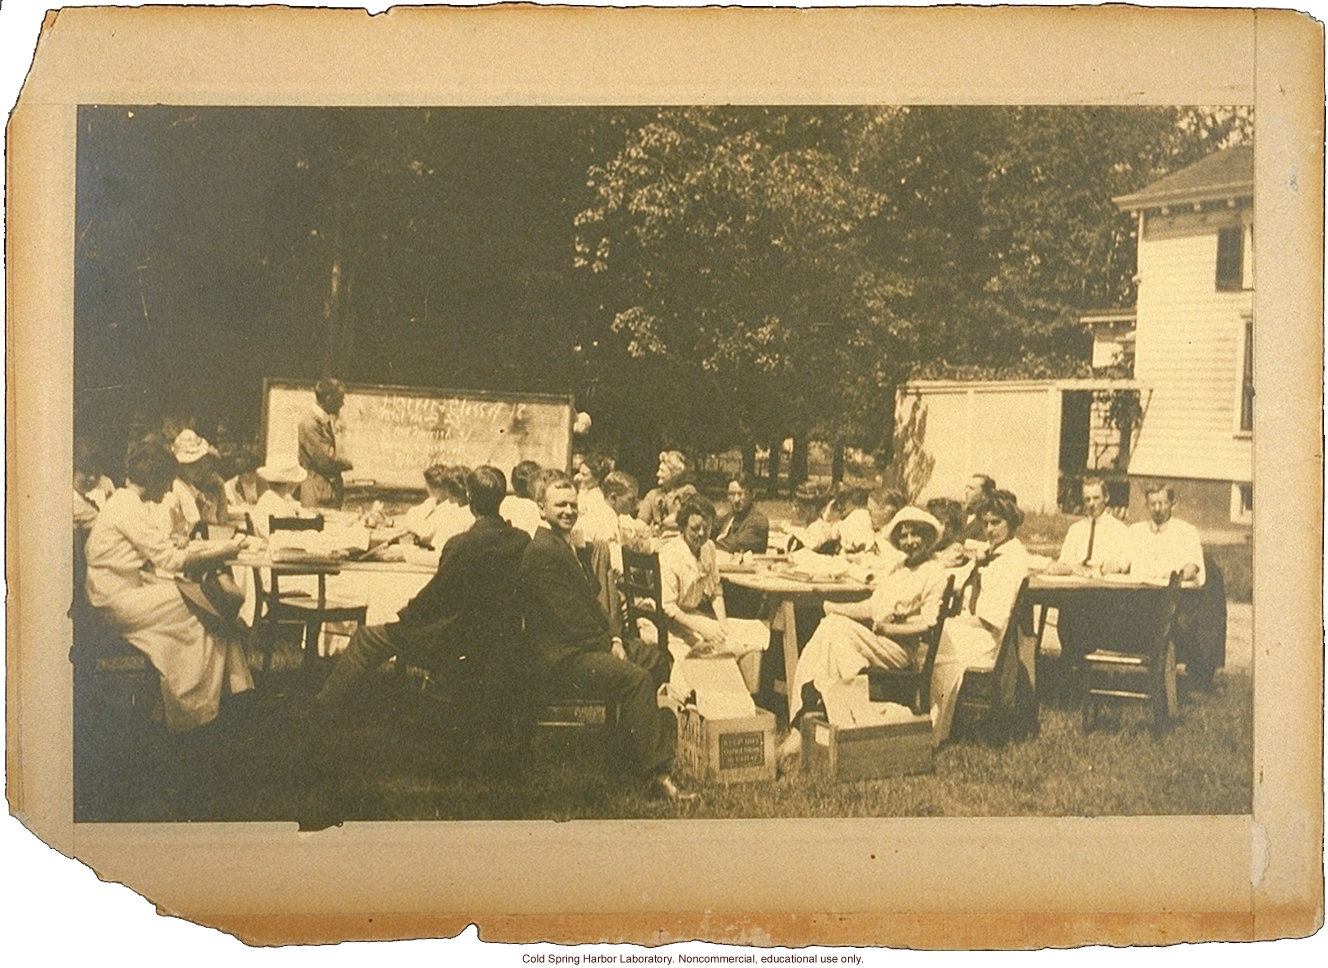 Eugenics Record Office, Field Worker Training Class of 1913 (Laughlin in foreground, center, Davenport at blackboard, Stewart House in background)